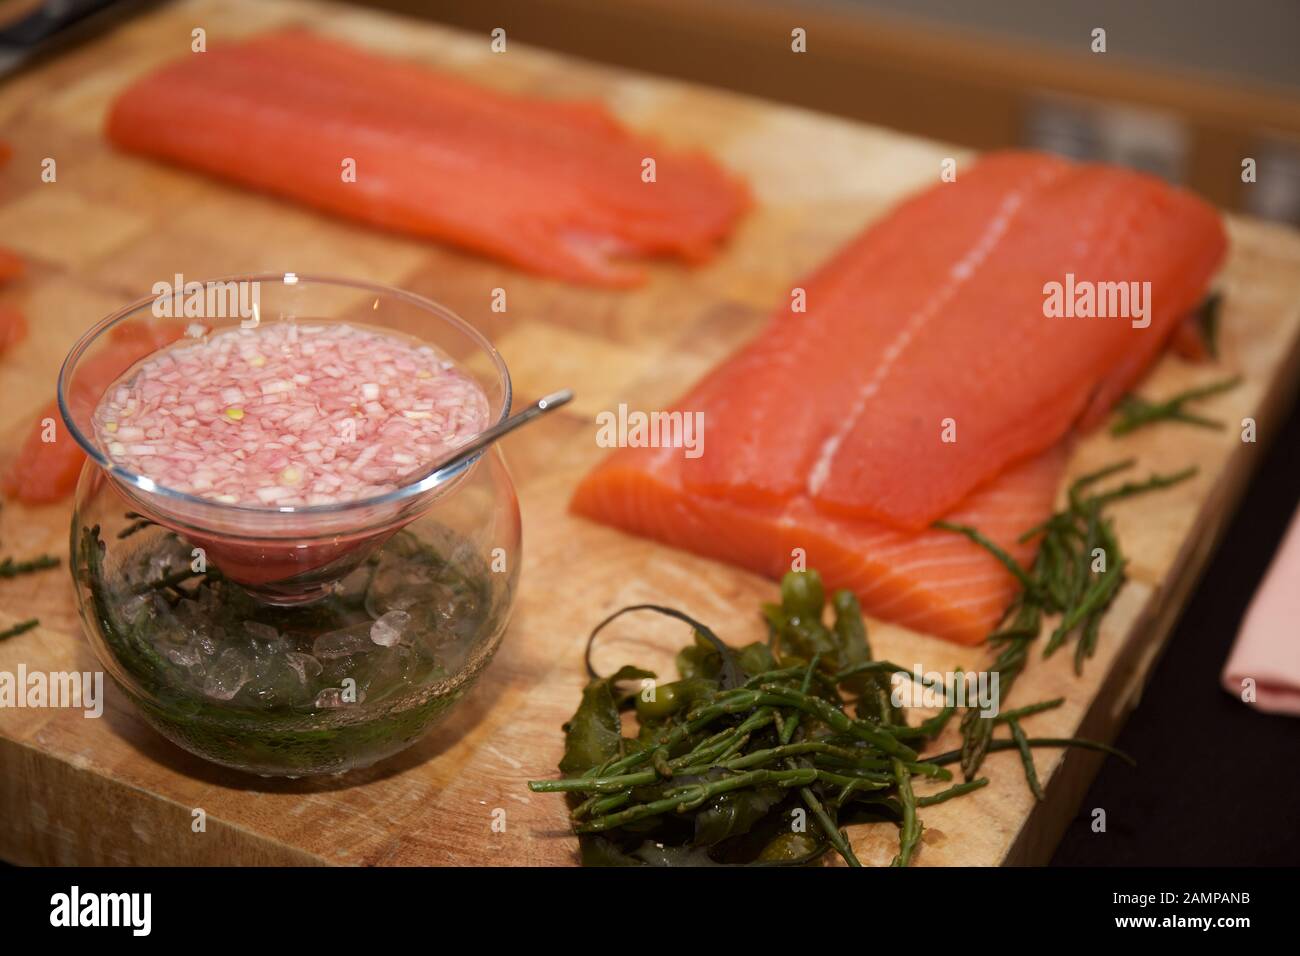 Preparing smoked salmon and seaweed on a wooden chopping board. Stock Photo